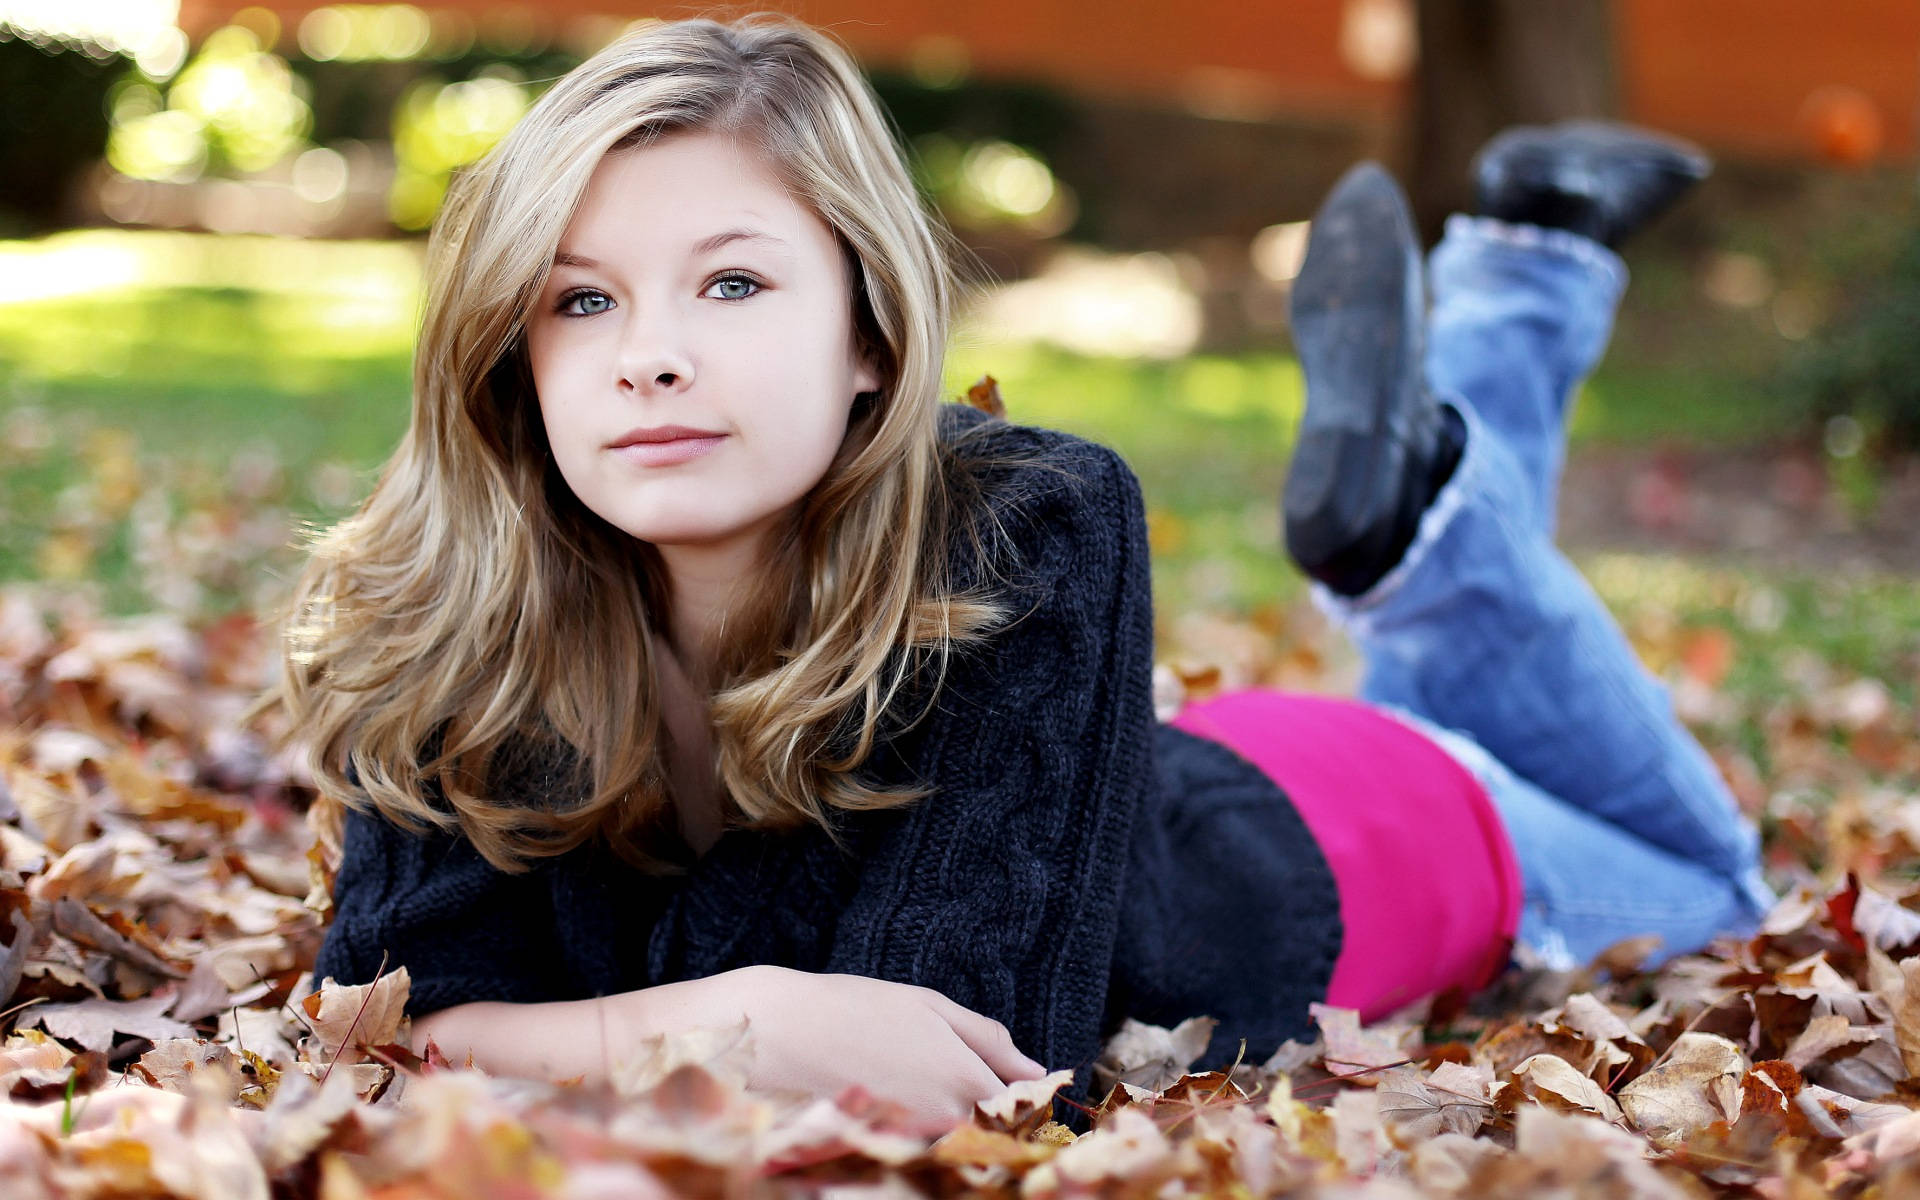 Autumn Bliss - A Beautiful Teenage Girl Among Dried Leaves. Wallpaper